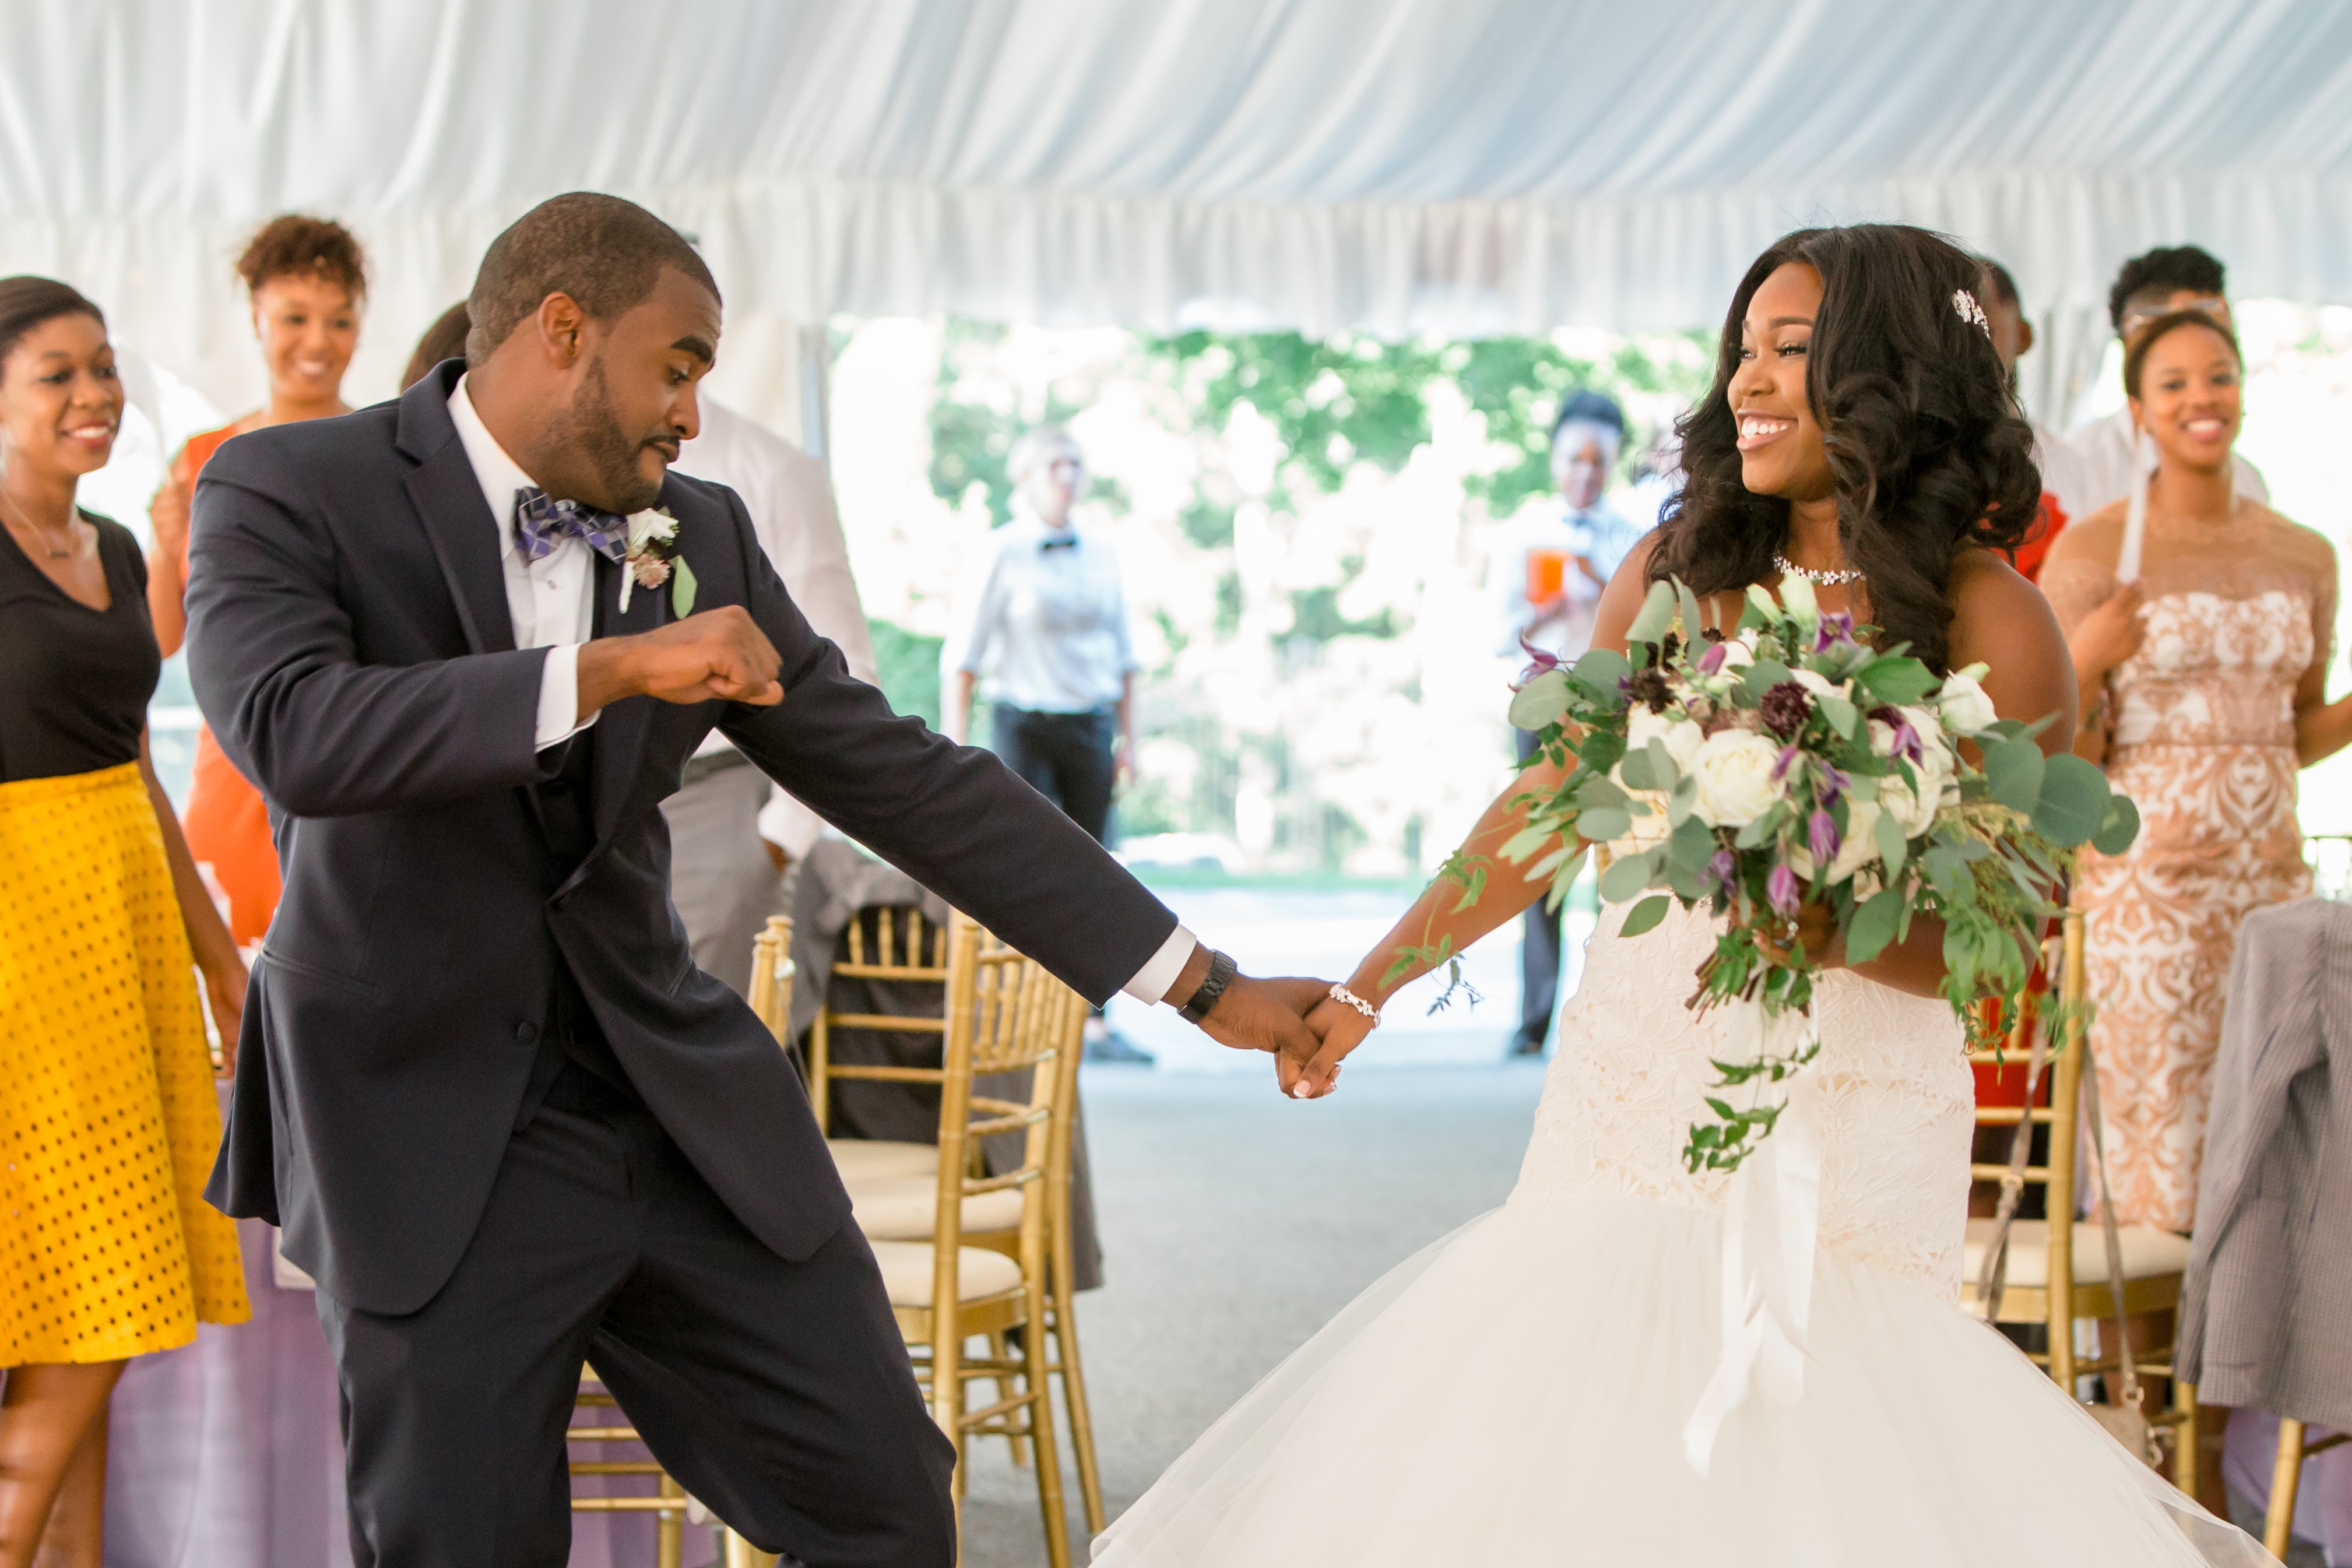 Bridal Bliss: Brian And Elesia's Tender Wedding Photos Will Make You Smile
